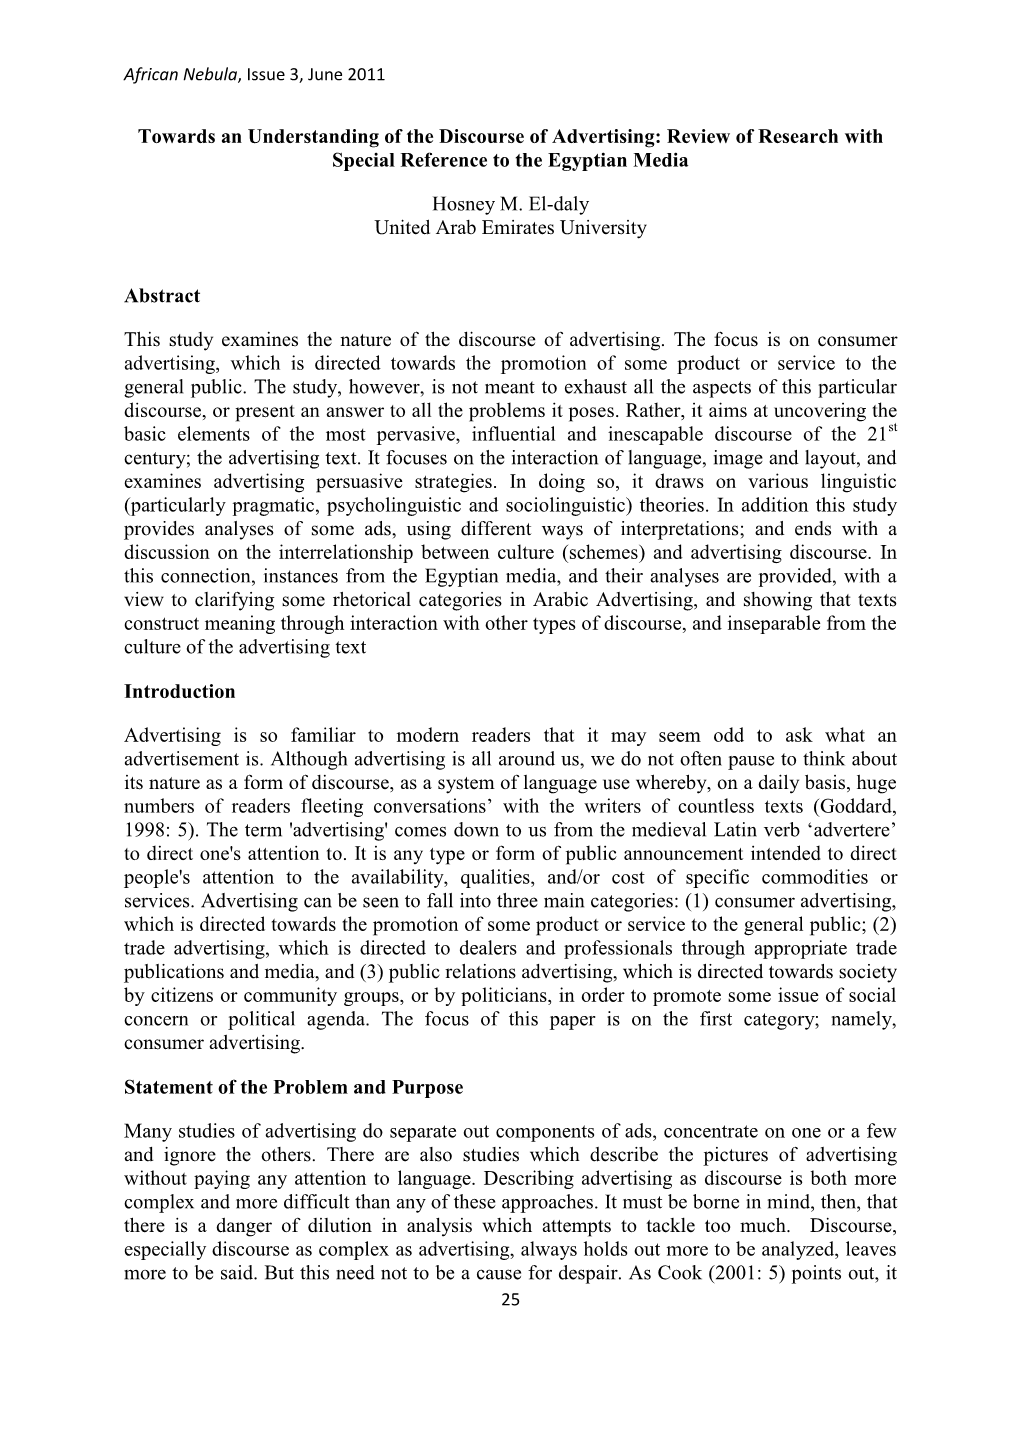 Towards an Understanding of the Discourse of Advertising: Review of Research with Special Reference to the Egyptian Media